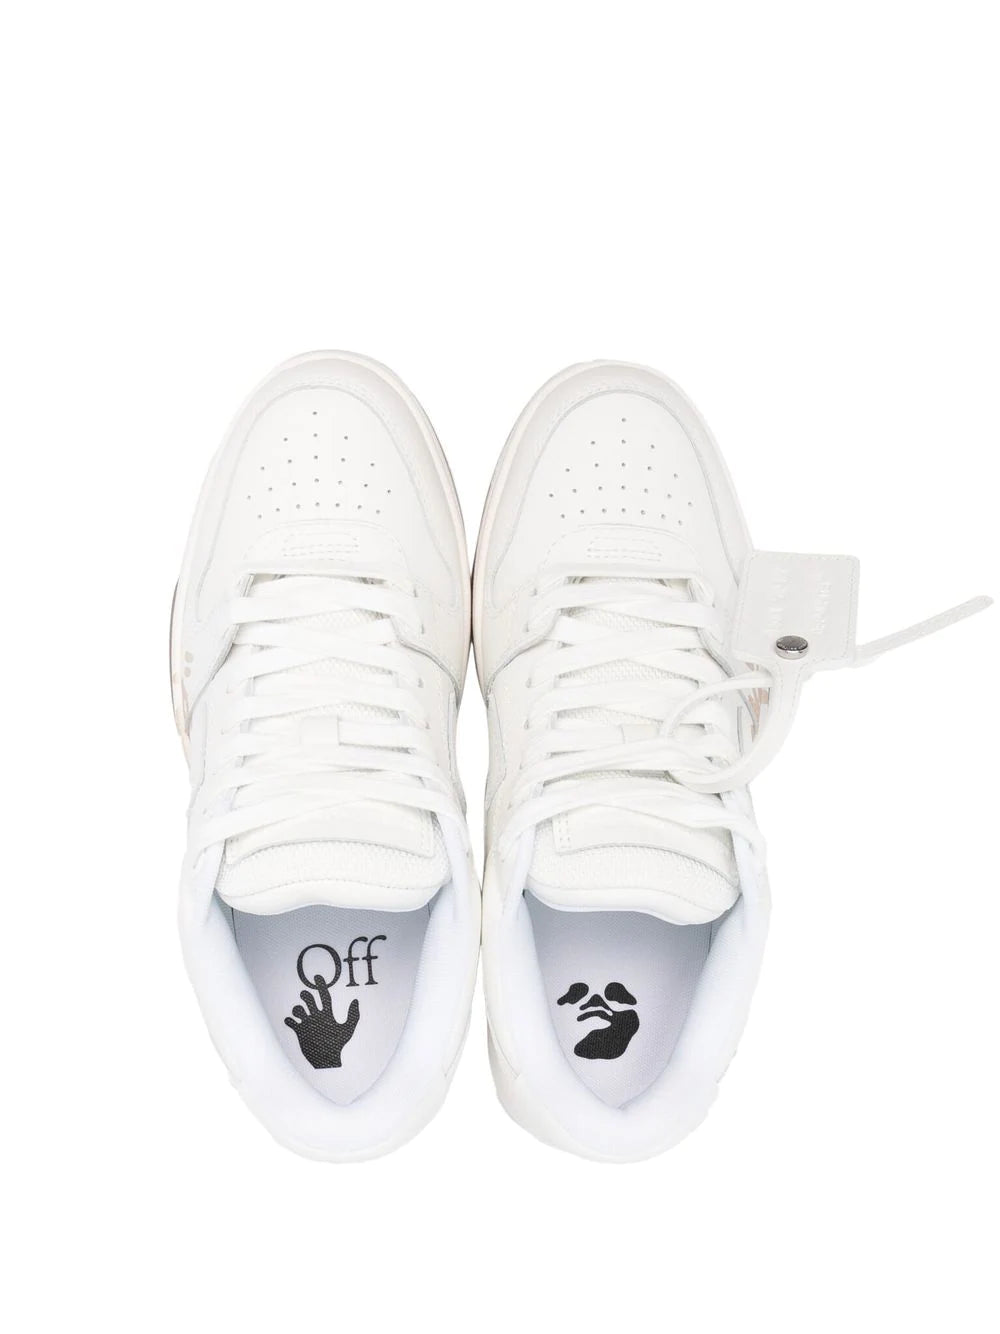 OFF-WHITE WOMEN Out Of Office "FOR WALKING" Sneakers White/Sand - MAISONDEFASHION.COM